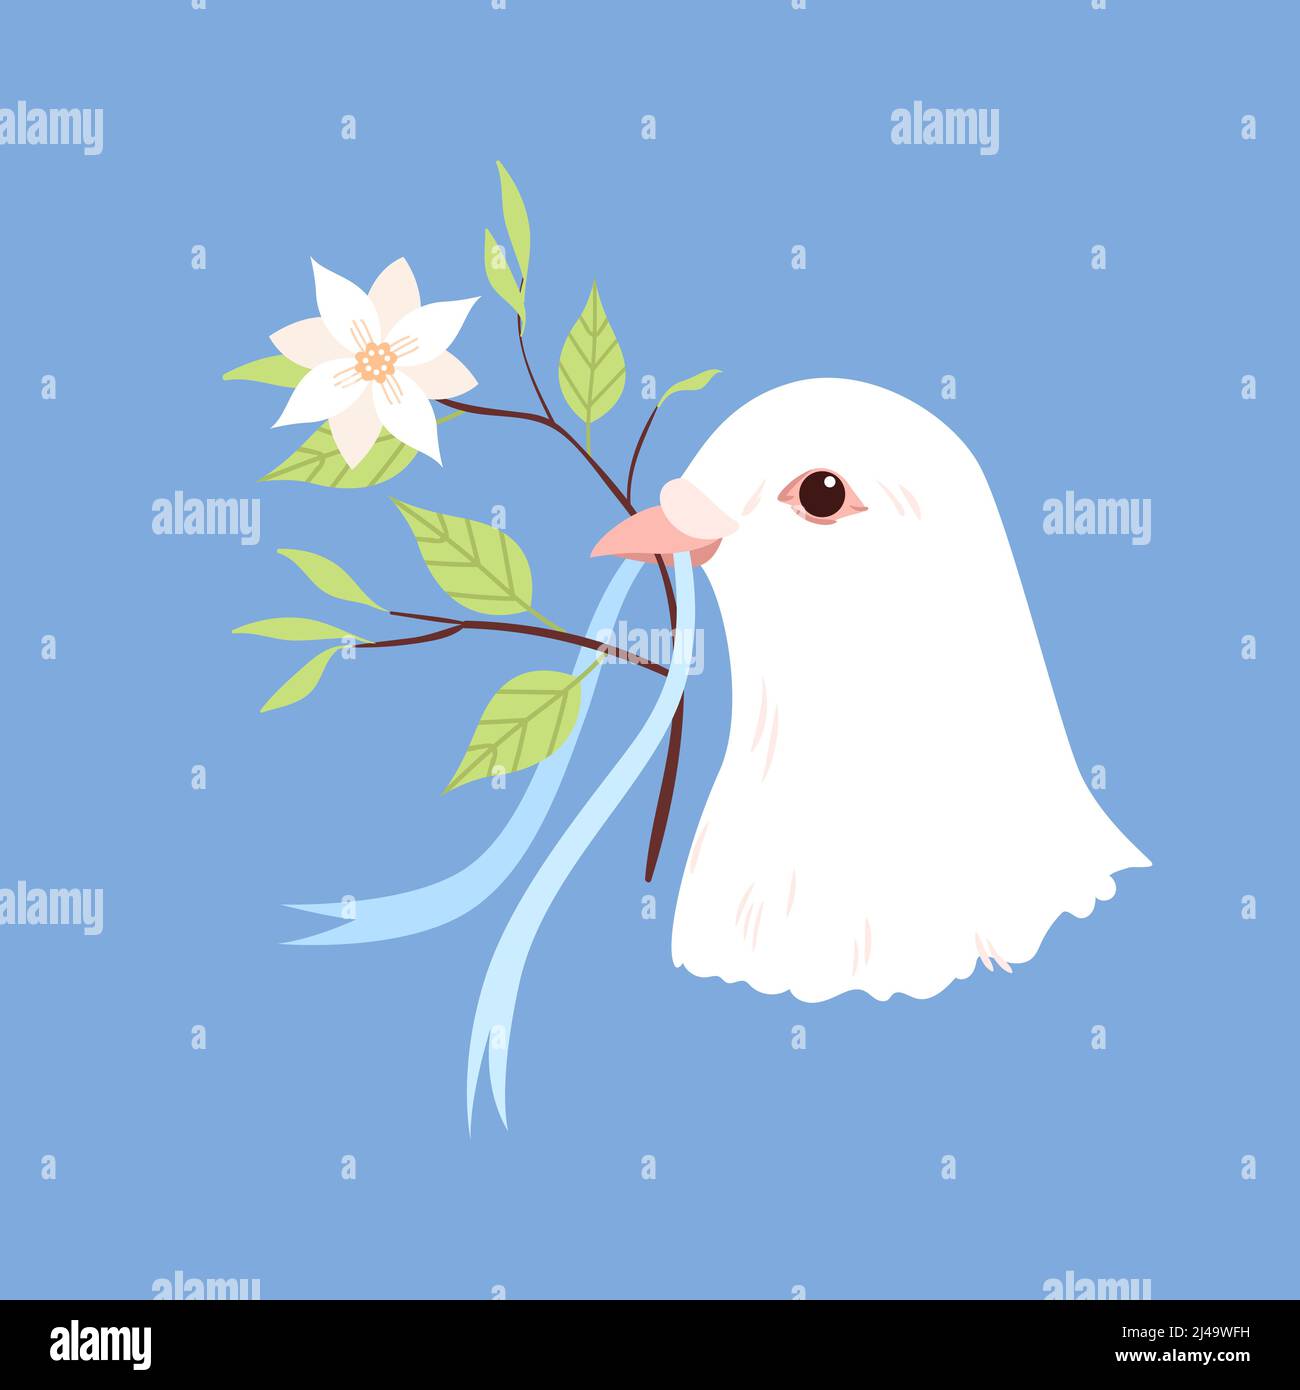 White dove head with branch of plant, spiritual world symbol of hope, peace concept Stock Vector